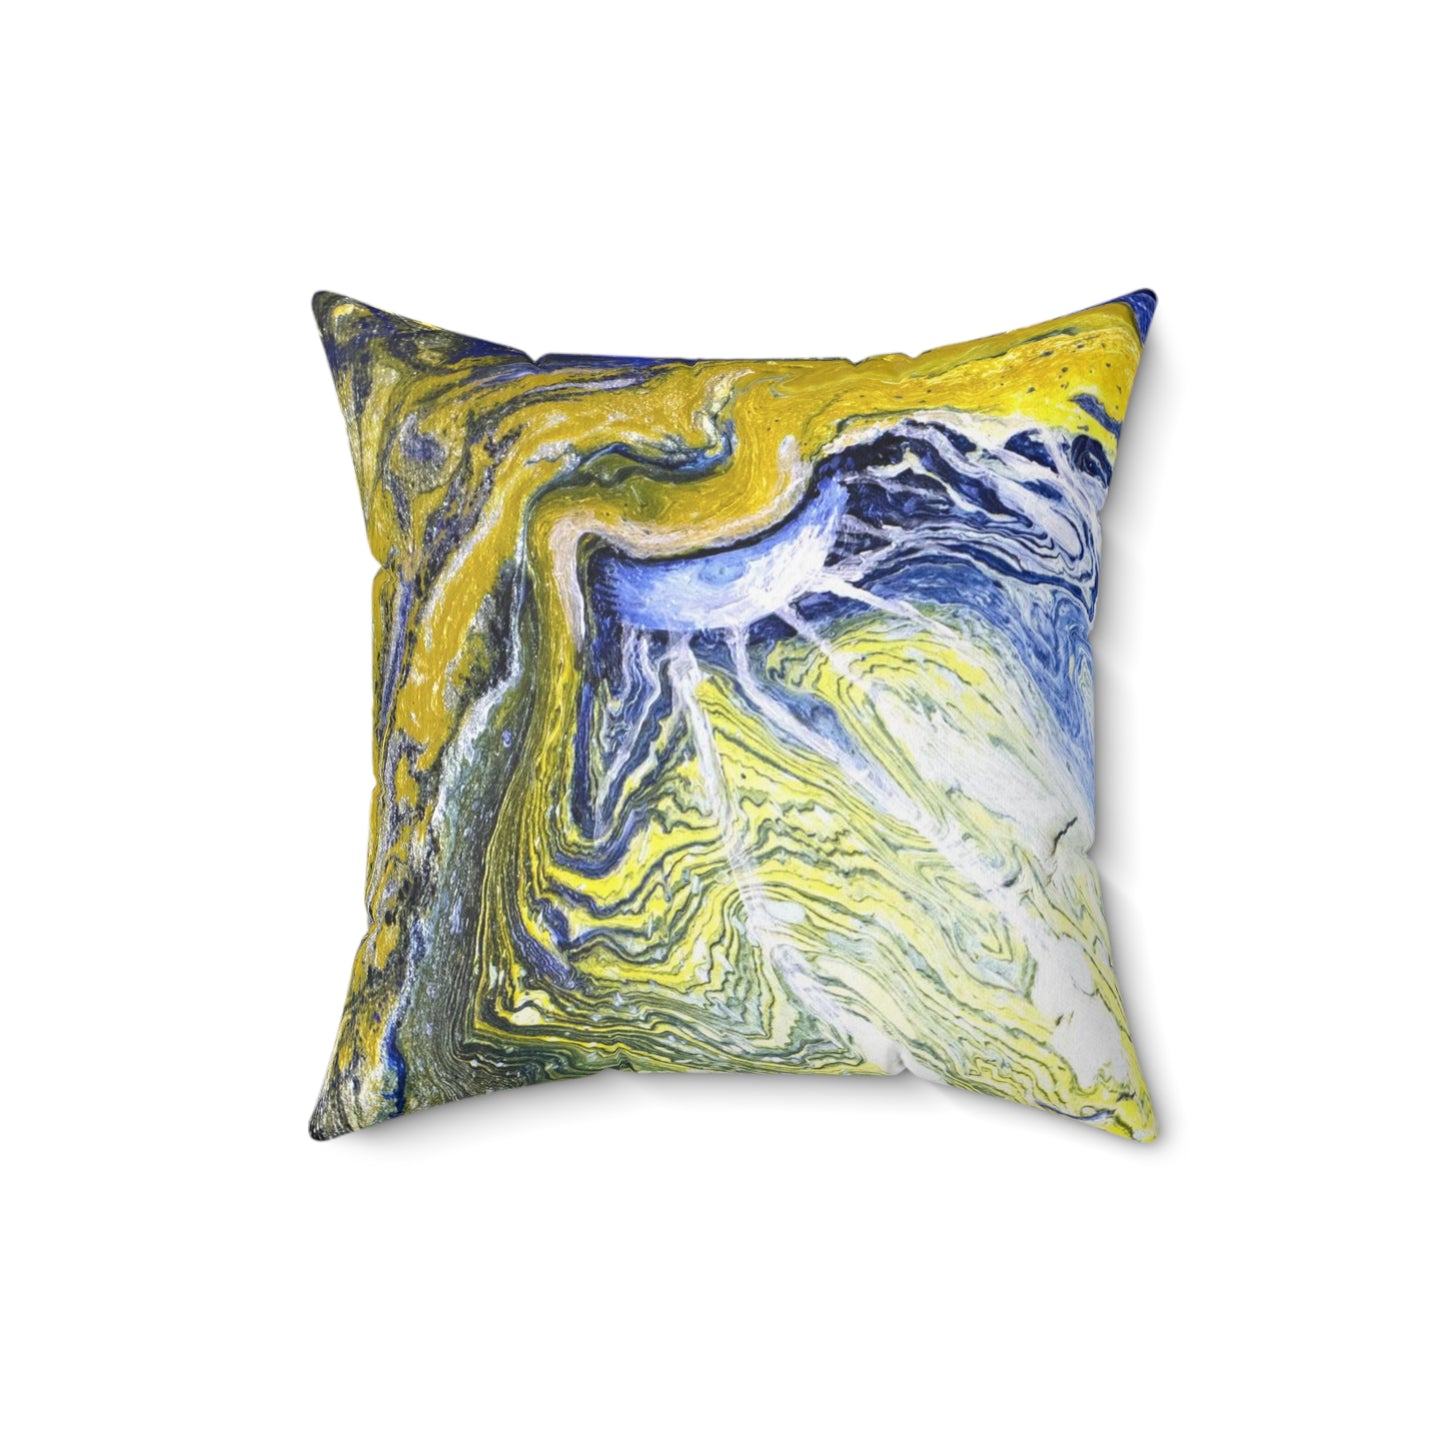 Fire Fly Moon Spun Polyester Square Pillow